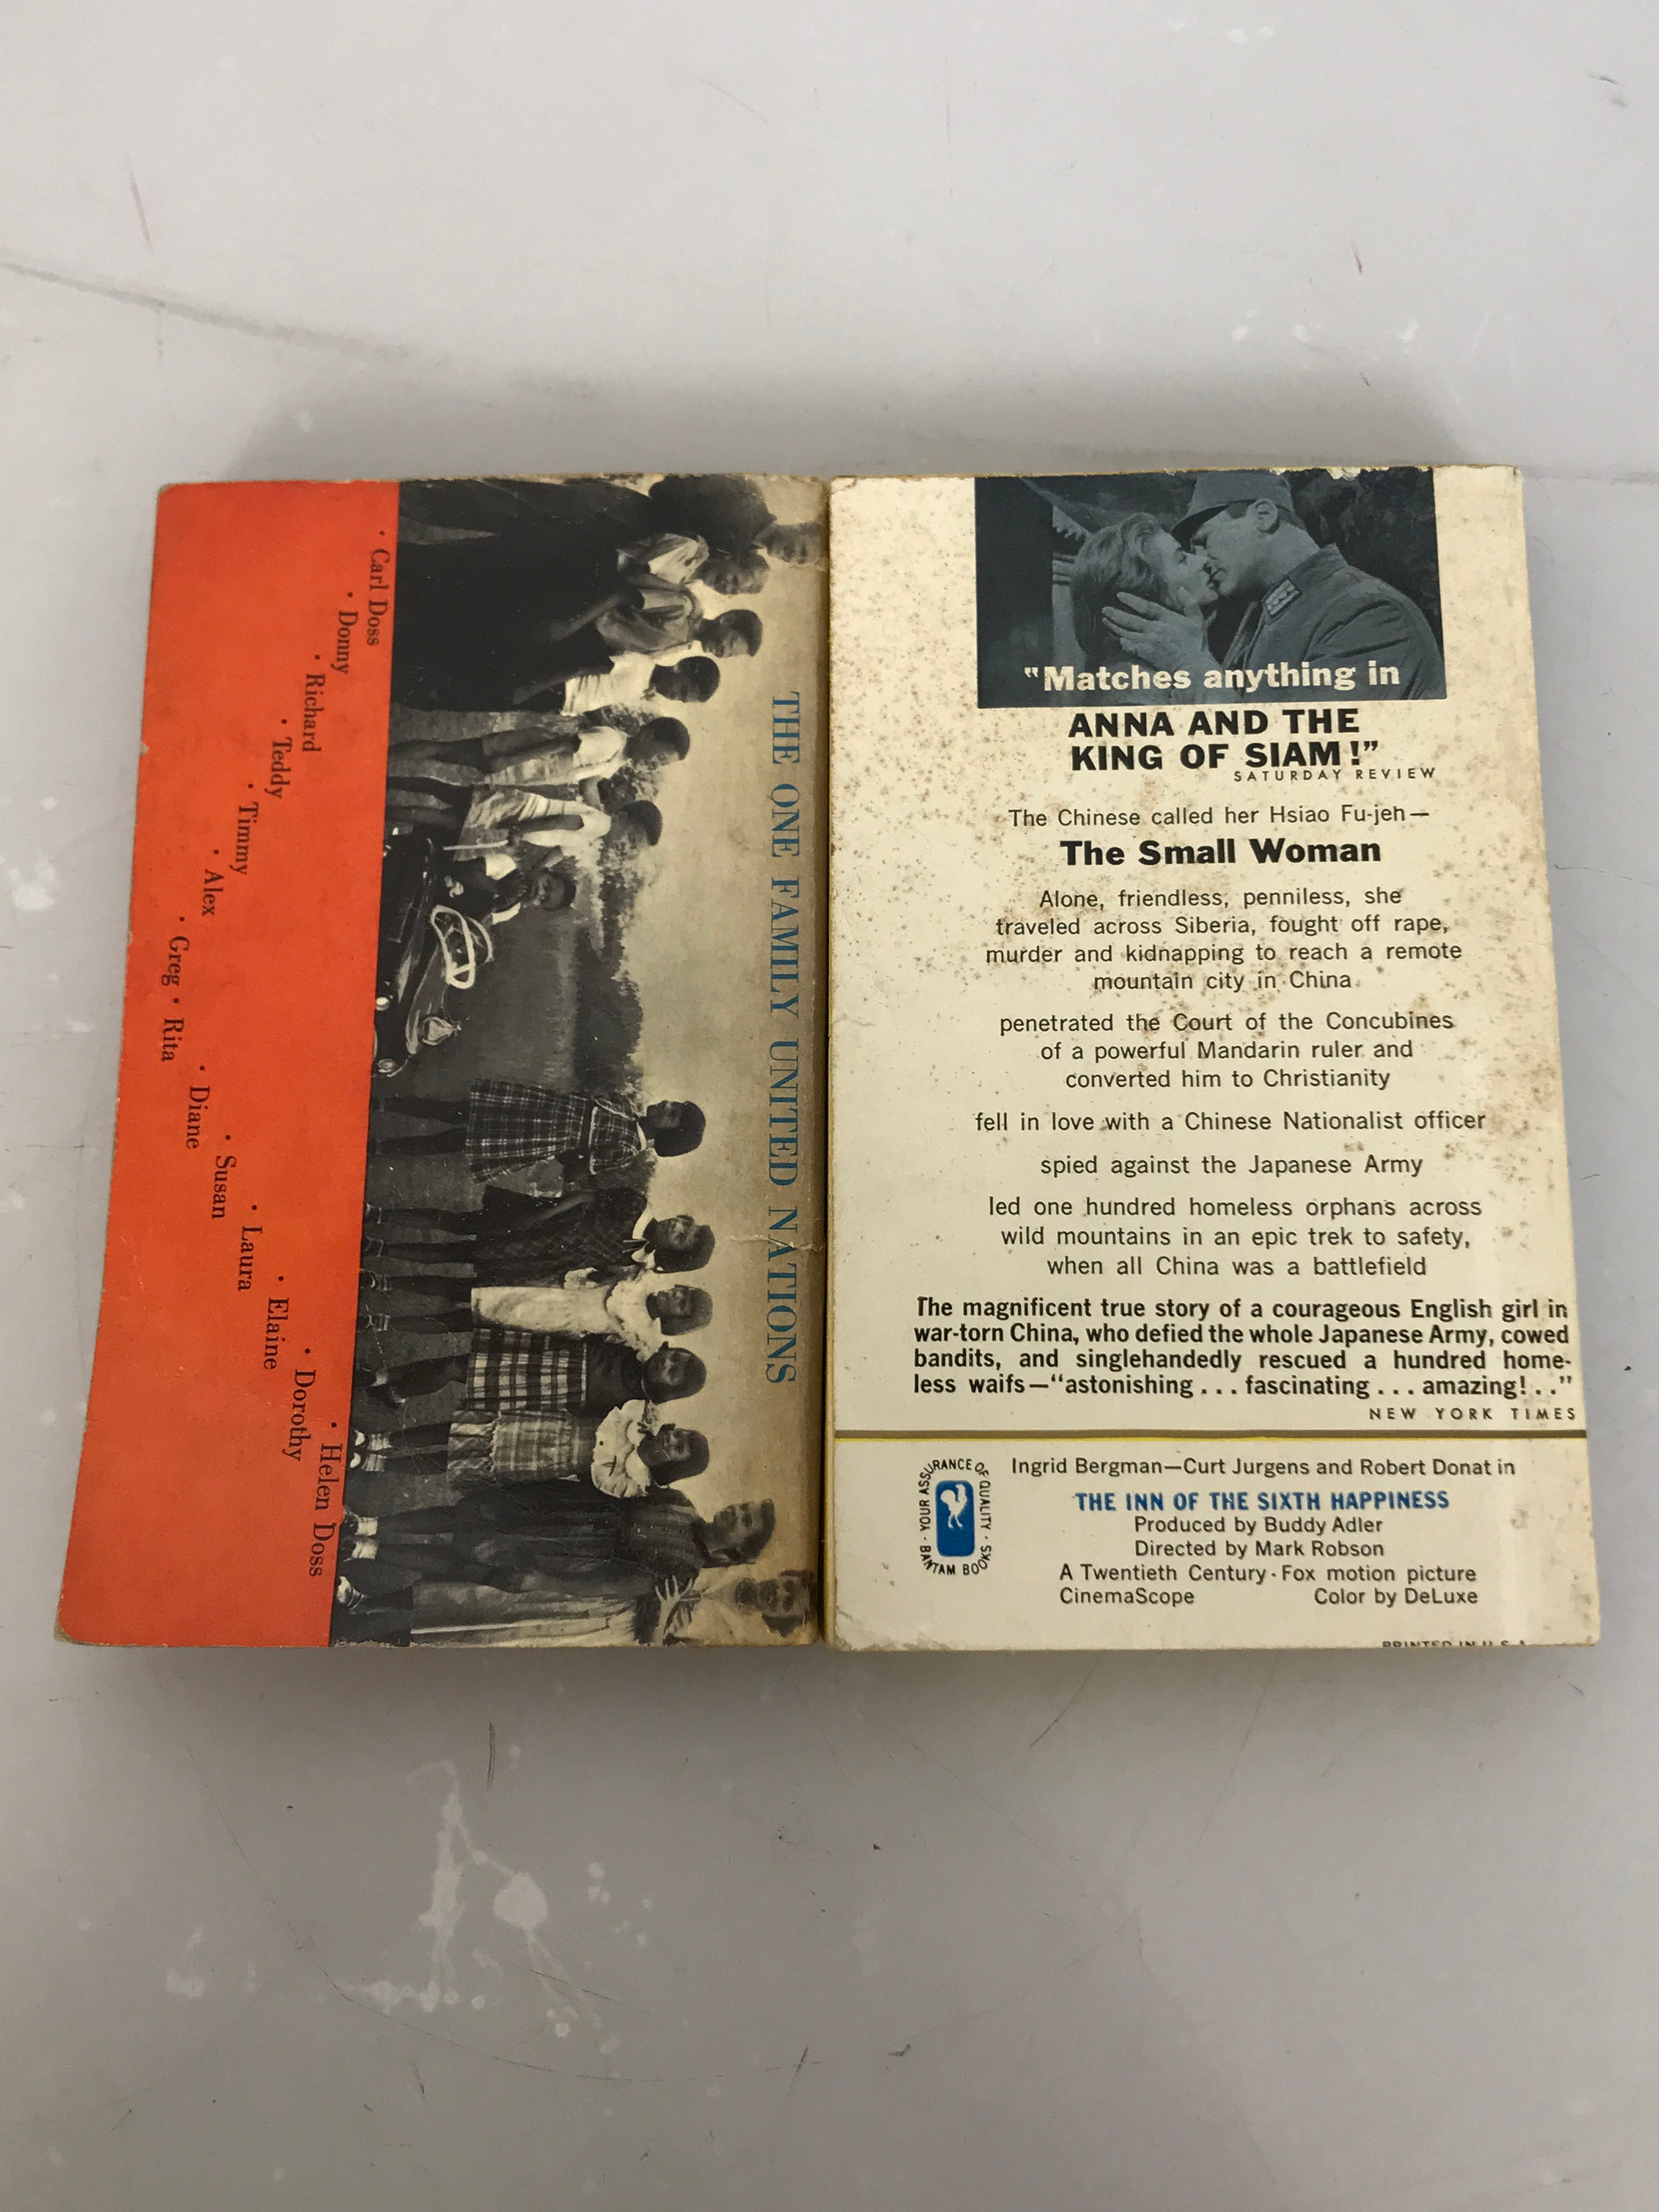 Lot of 2 Vintage True Stories: The Family Nobody Wanted (1960) and The Inn of the Sixth Happiness (1958) SC